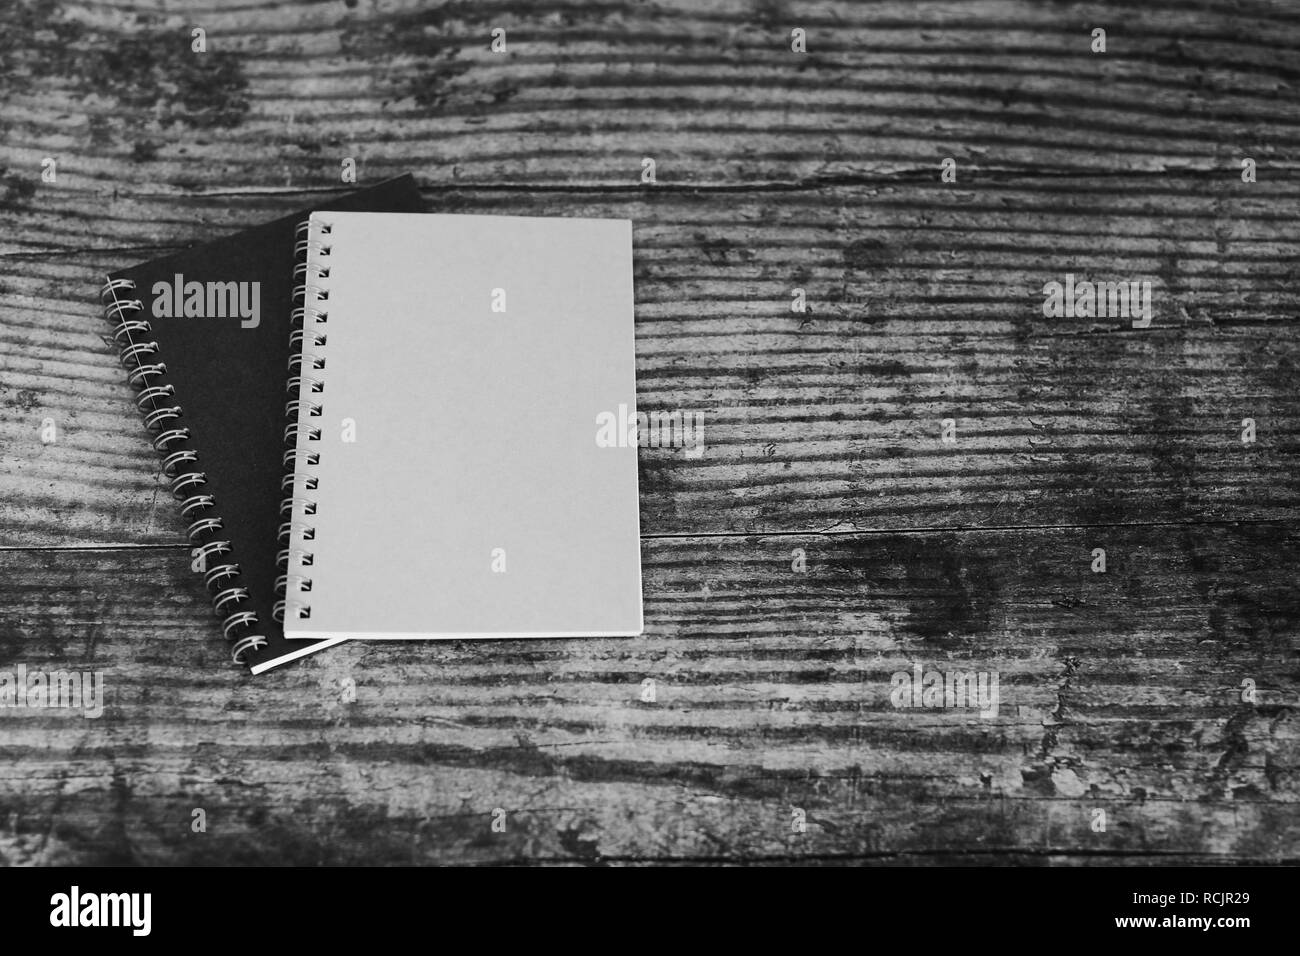 Minimalist Desk Setting Flatlay With Notepads On Dark Wooden Surface In Black And White Stock Photo Alamy